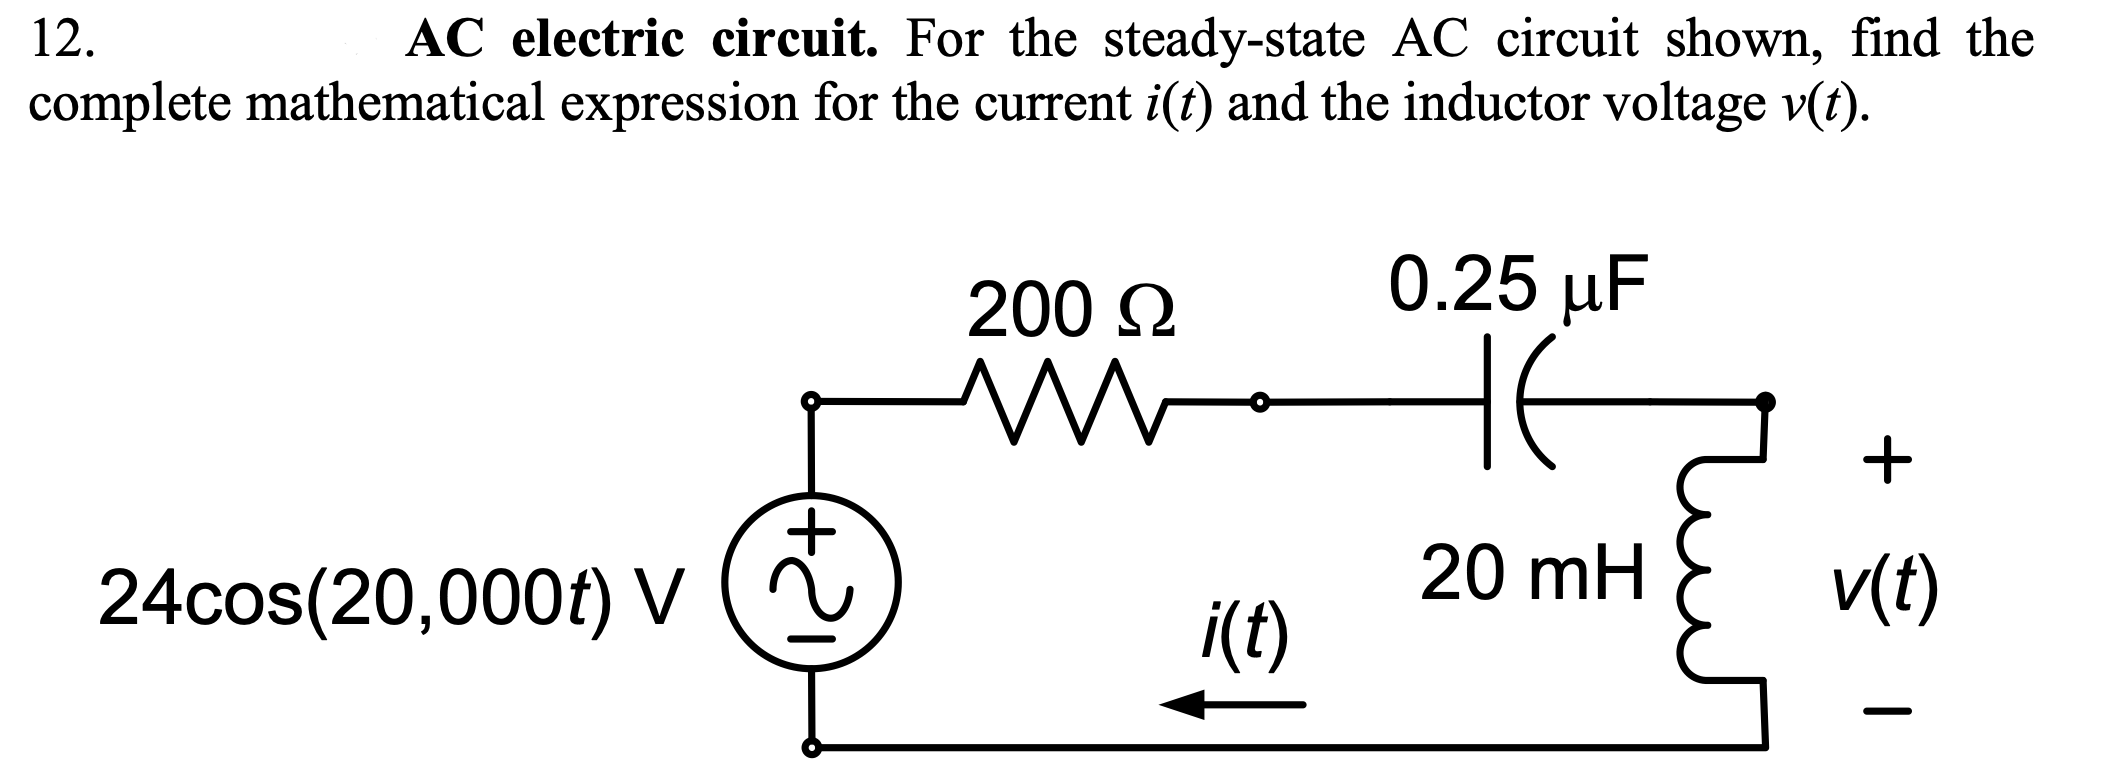 solved-12-ac-electric-circuit-for-the-steady-state-ac-chegg